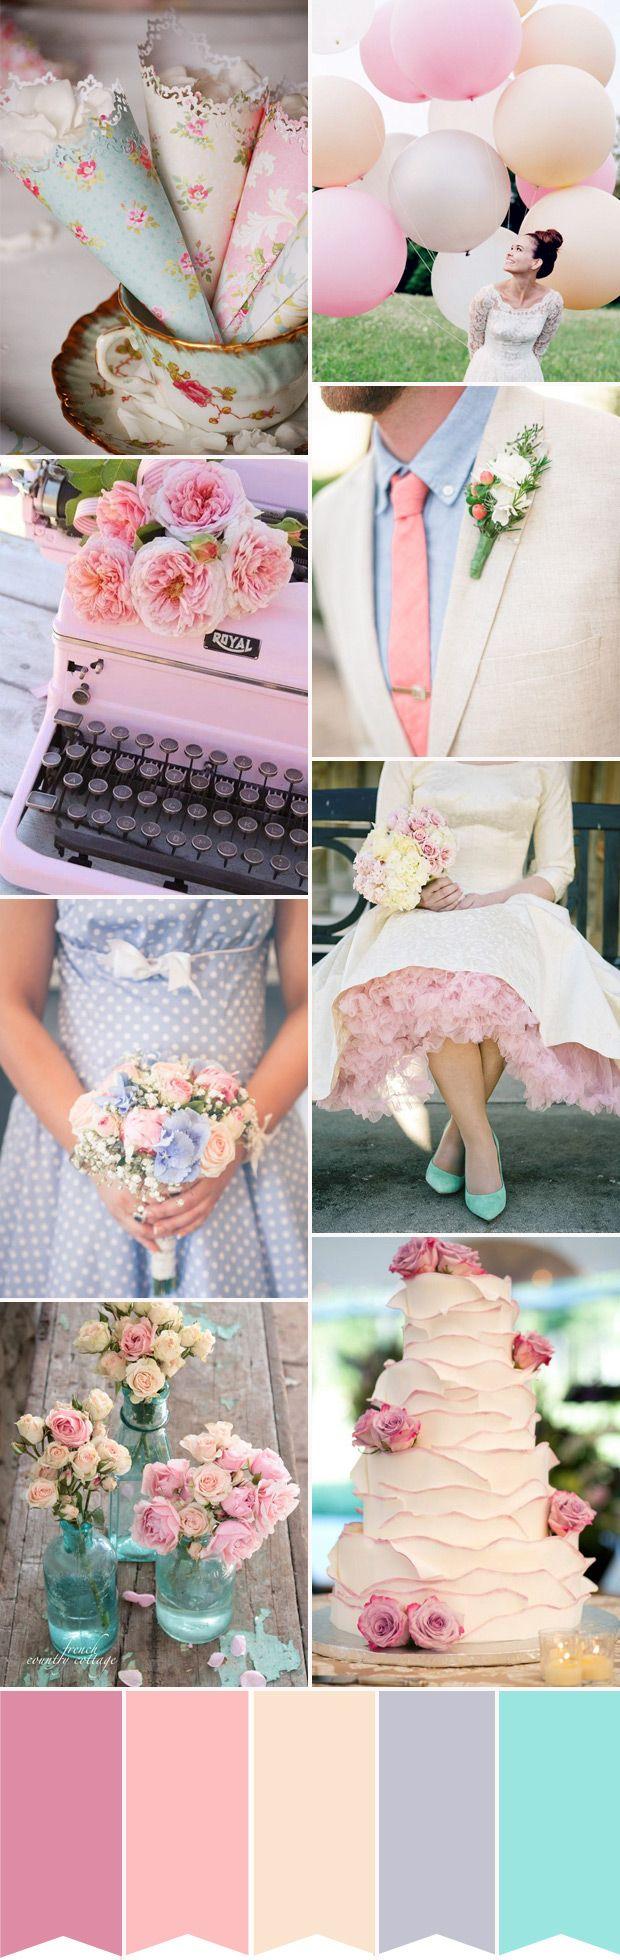 Wedding - Pretty Pastels: Pink And Blue Colour Palette